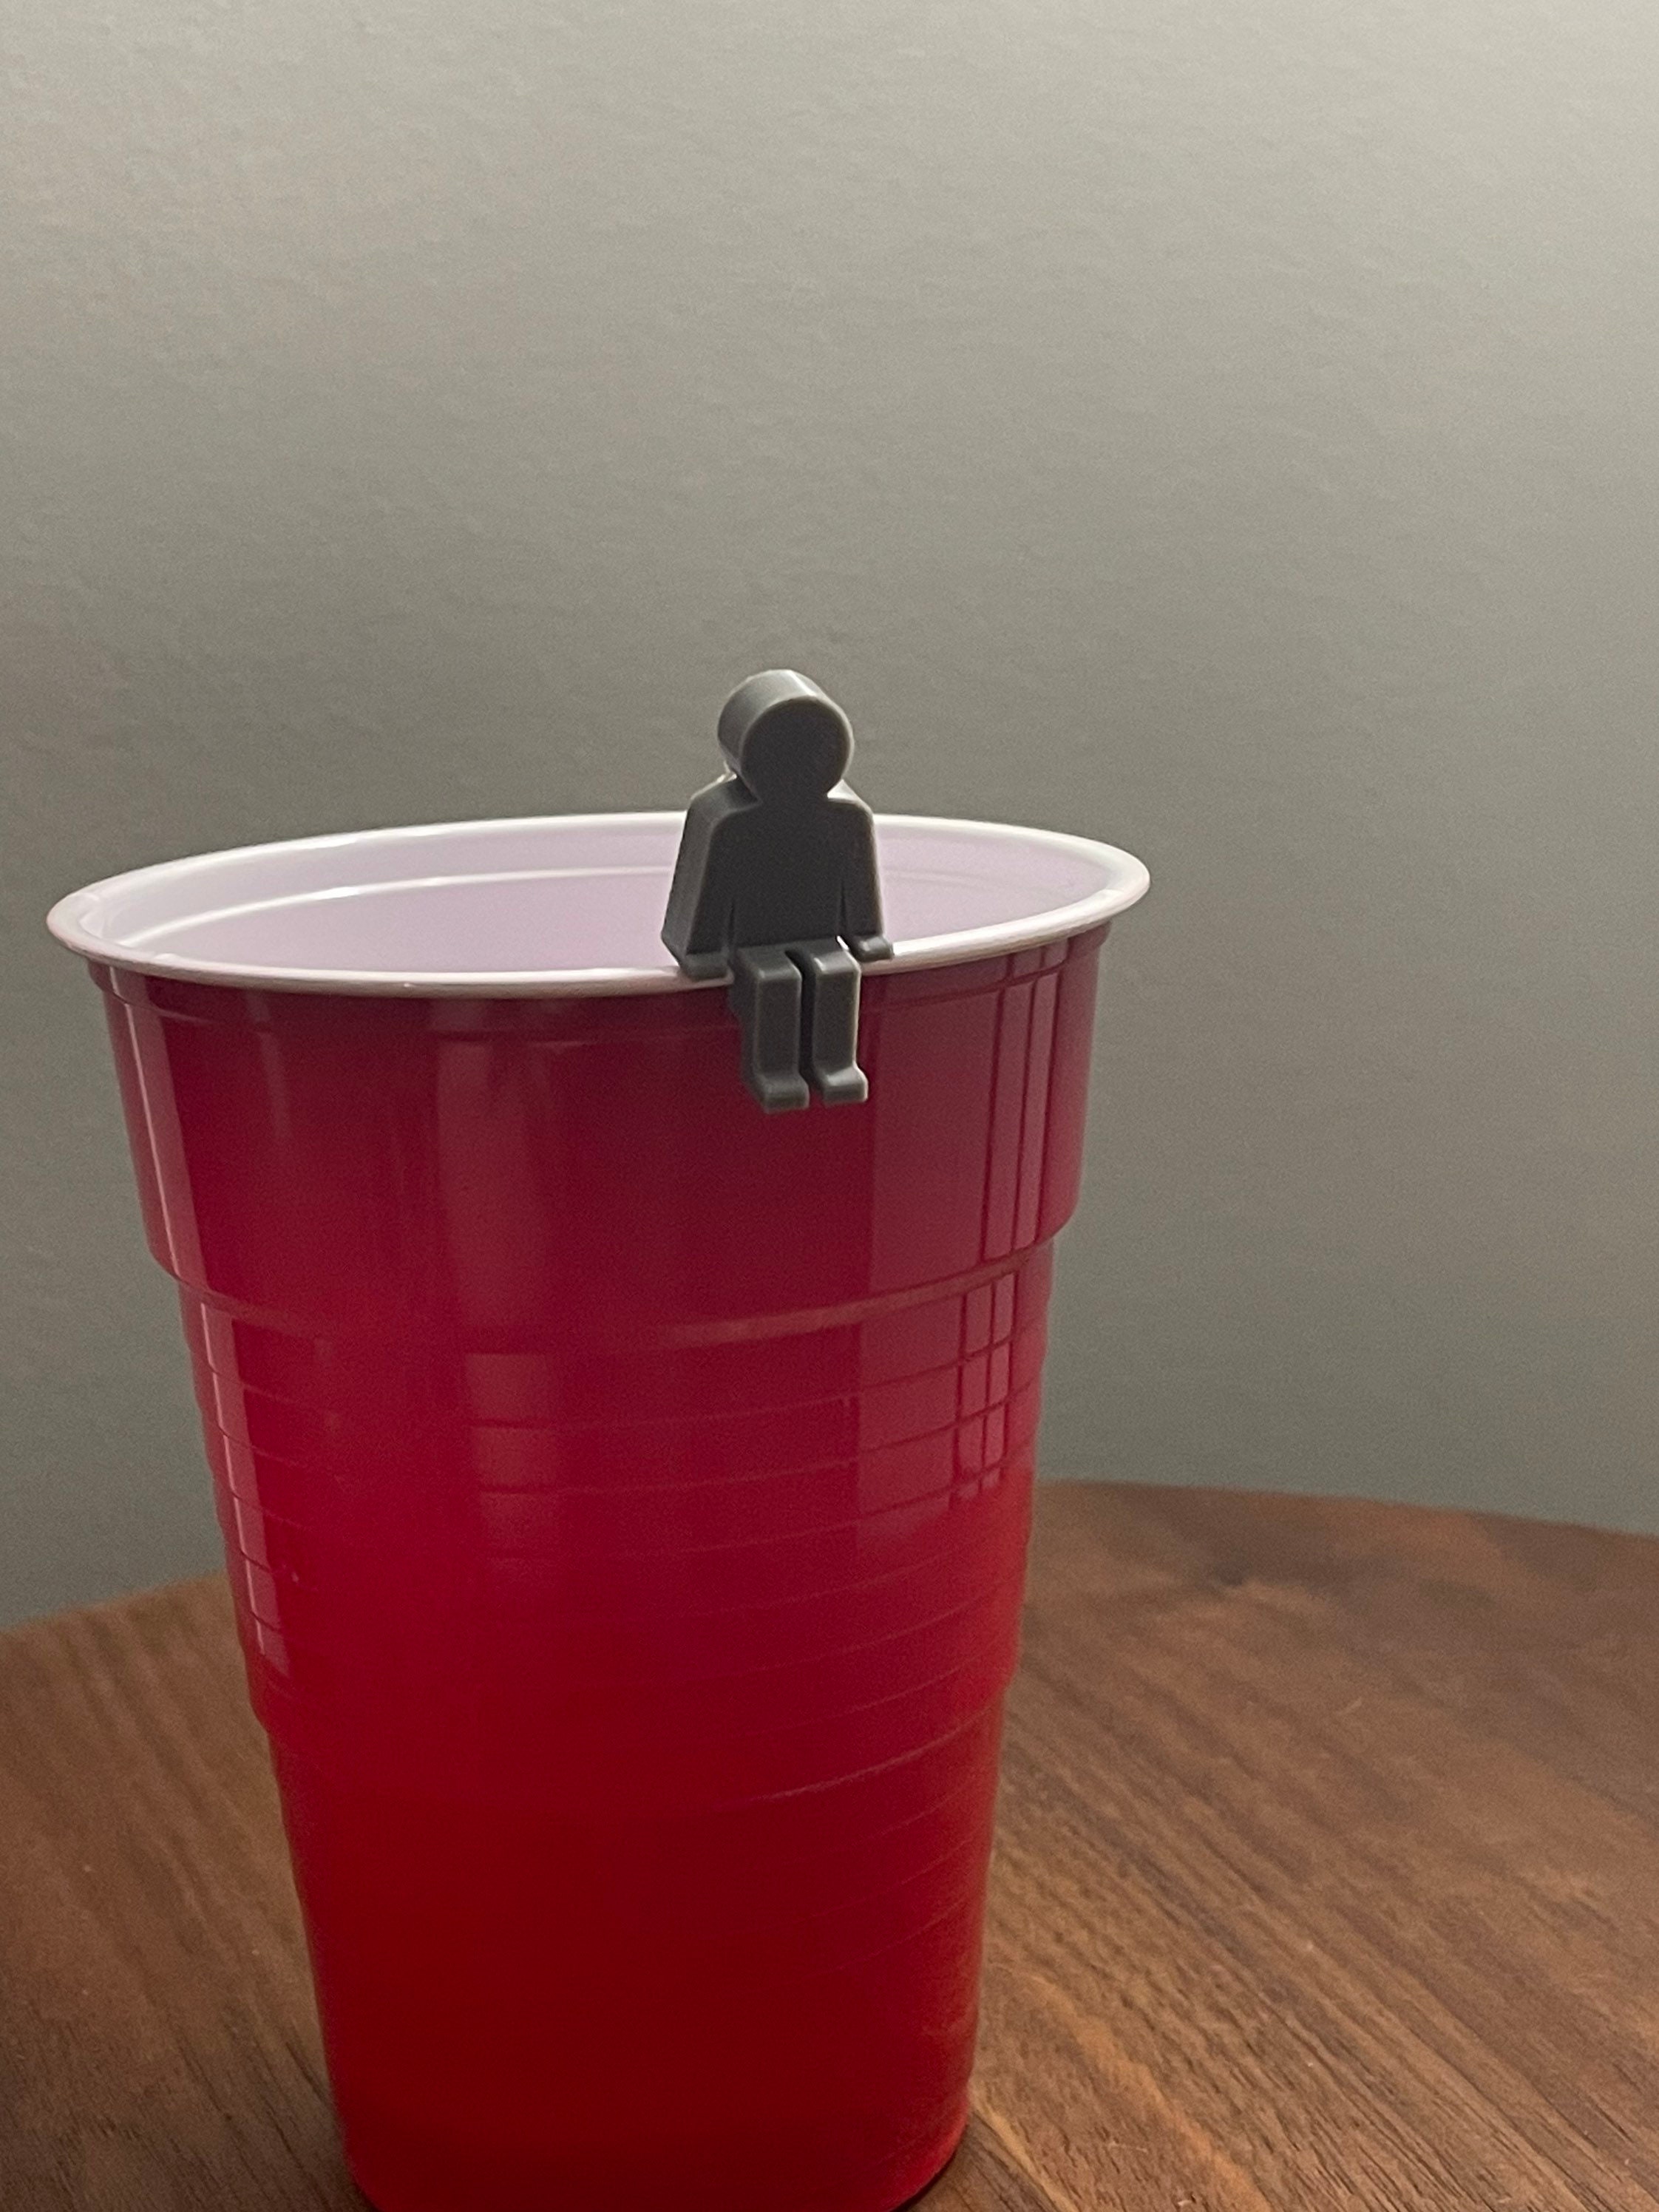 Red Plastic Cup Stud Earrings Post Beer Jewelry Beer Accessories Beer Pong  Drinking Game Party Keg Alcohol BYOB College Funny Beer Gift Idea 